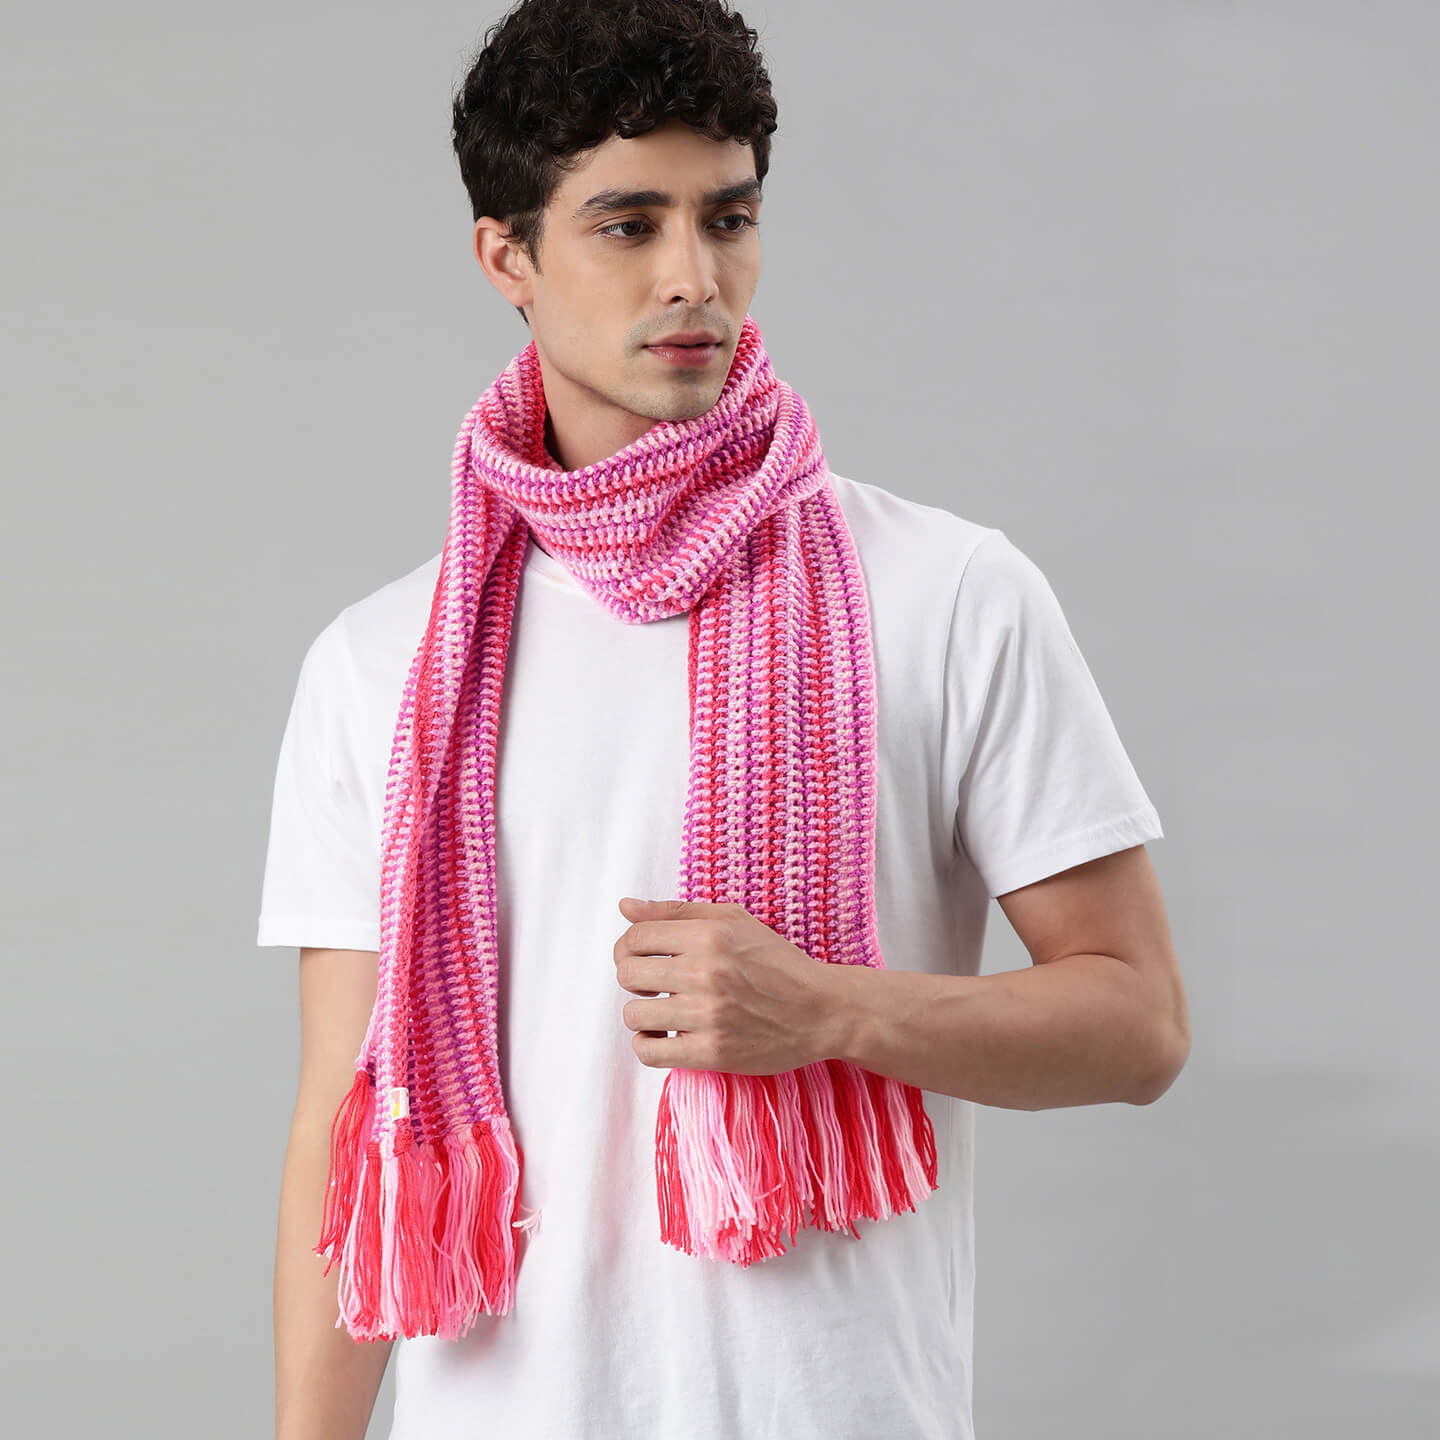 Scarf with Tassels - Multi-Color 2571